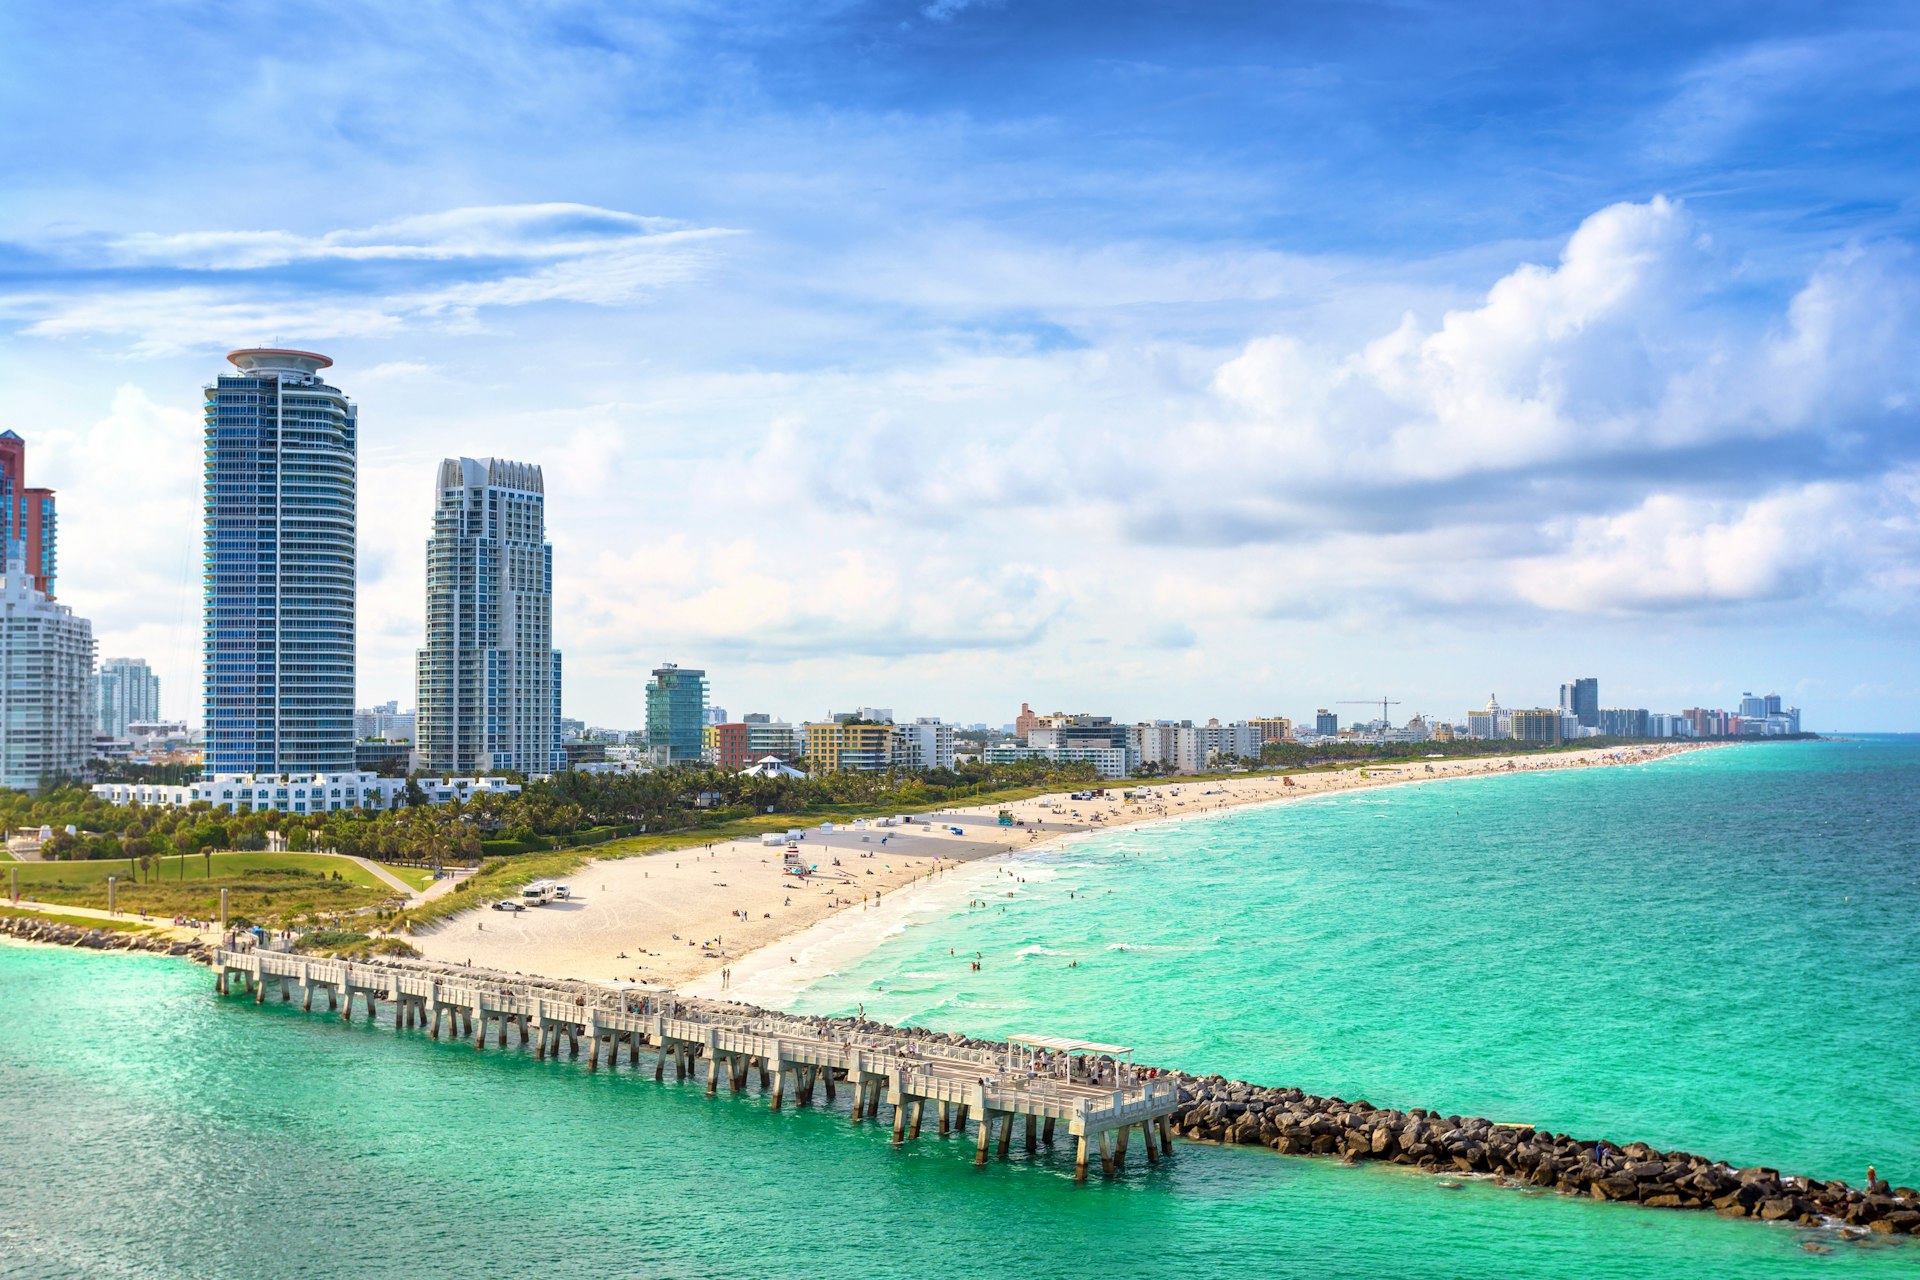 Panoramic view of South Beach at Miami South Pointe Park with high skyscrapers and a blue sunny summer sky, Florida, USA.